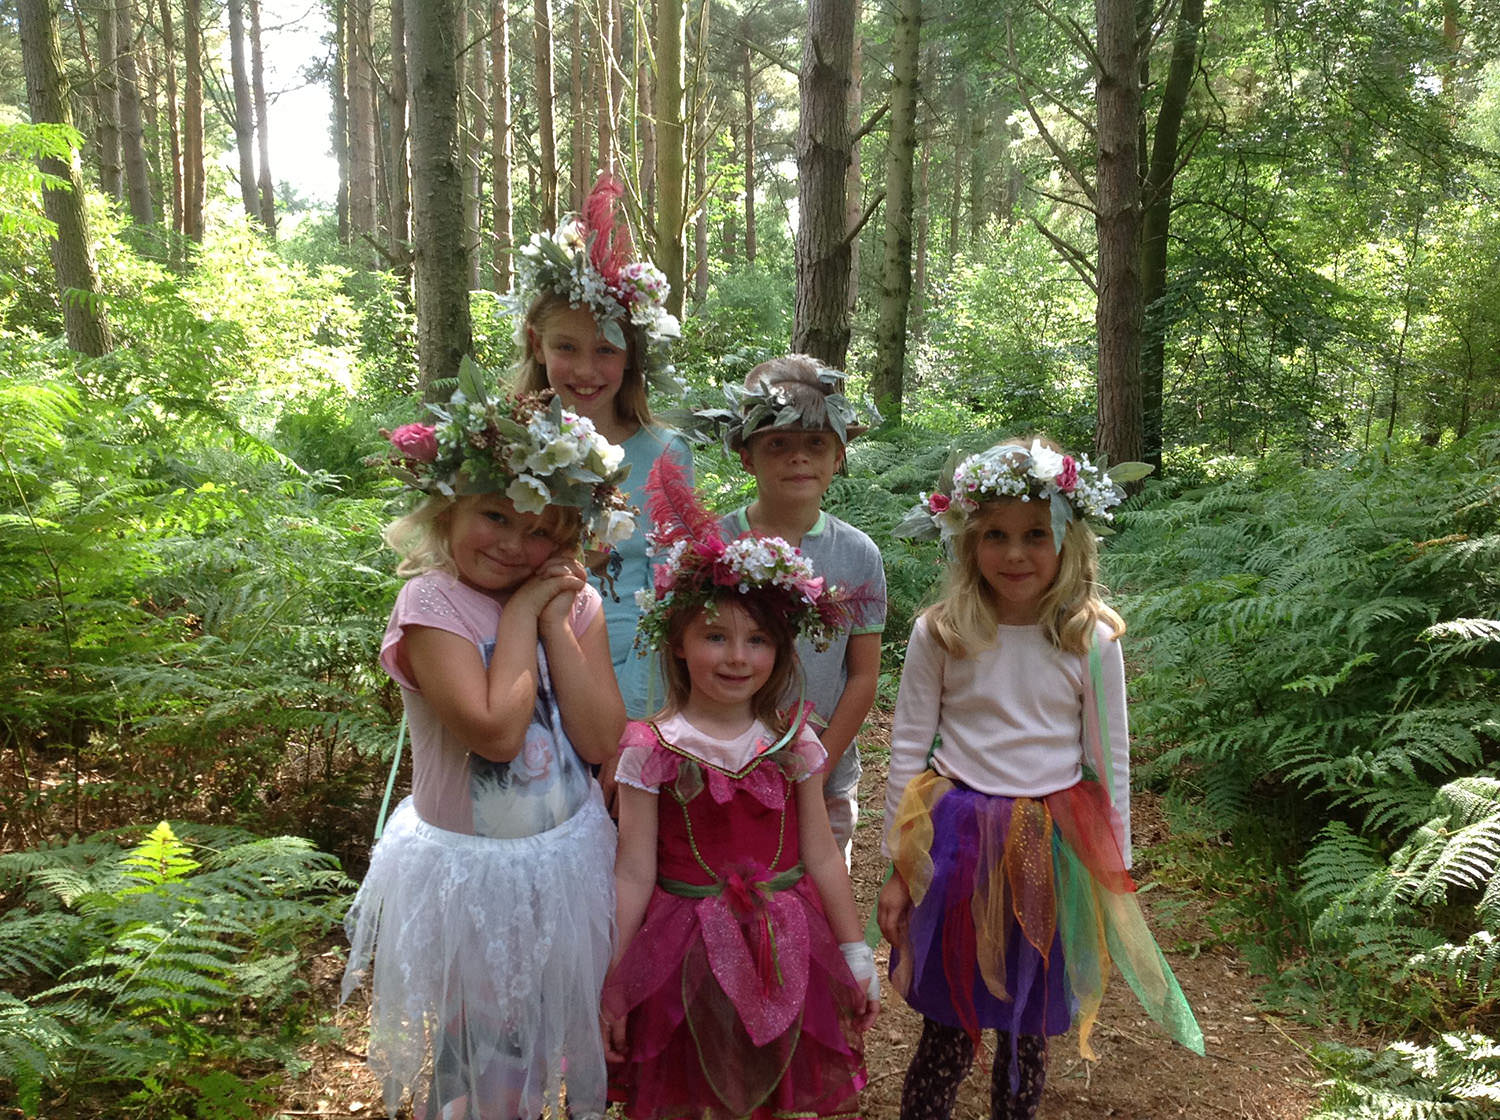 A group of small children stood in a wood dressed as faries